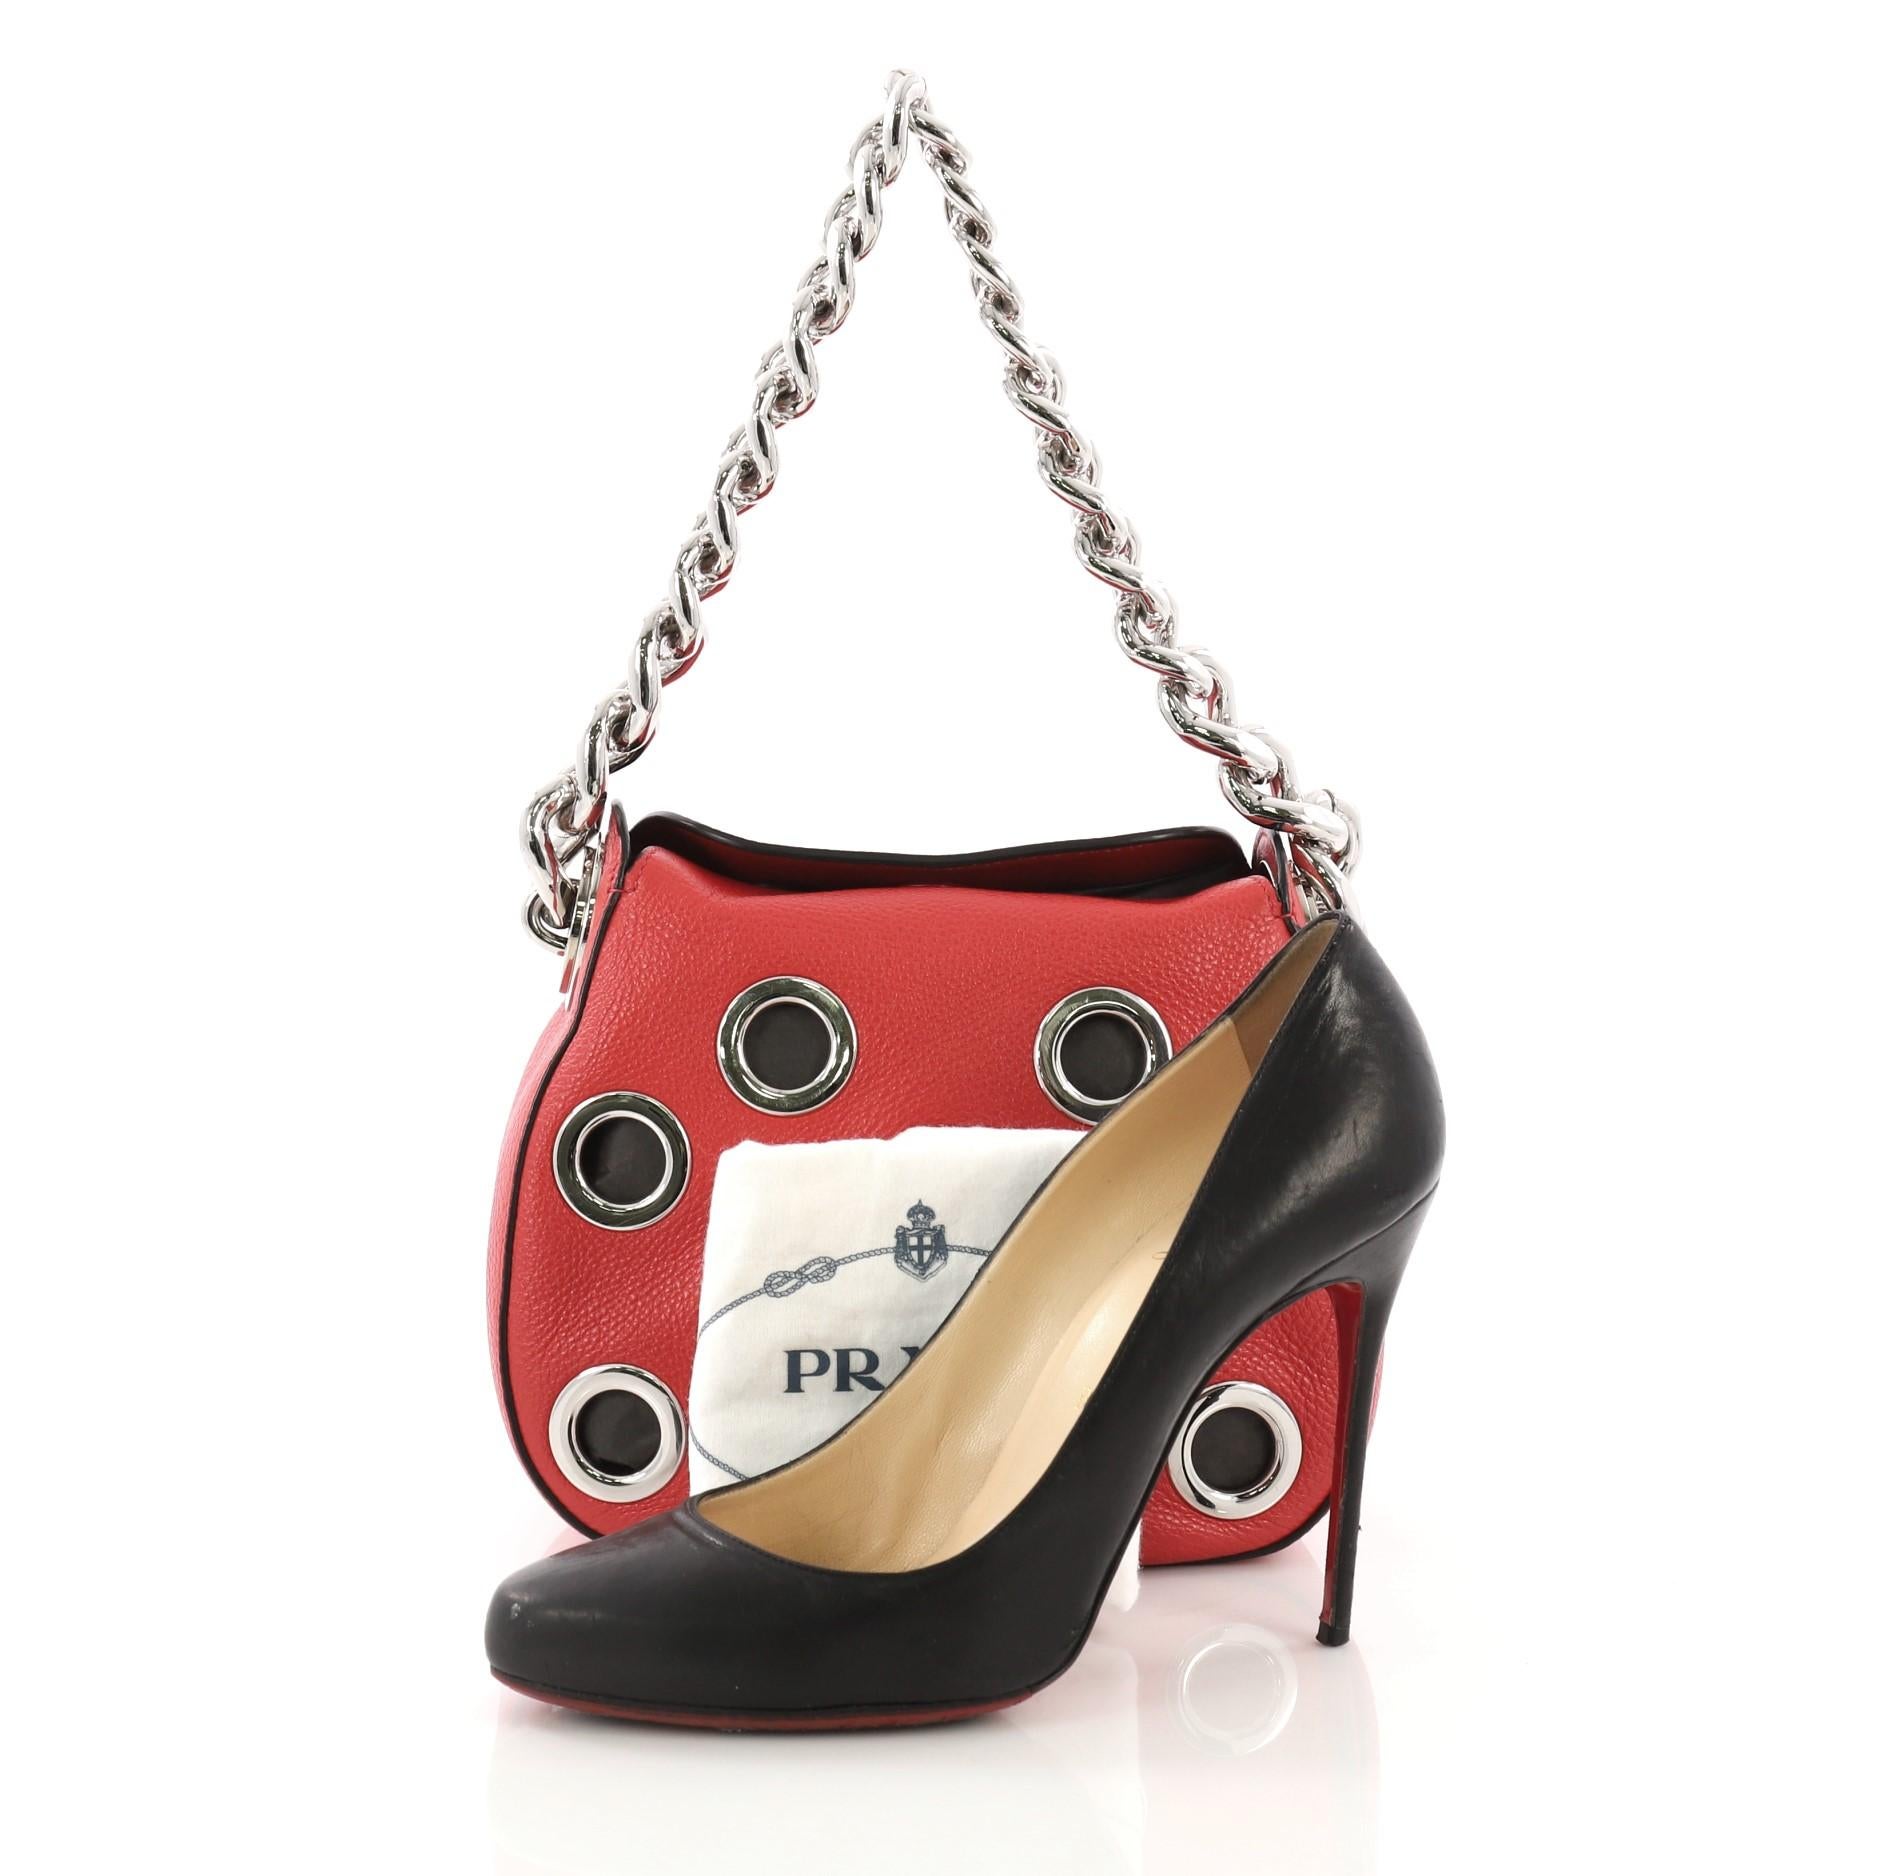 This Prada Grommet Chain Hobo Vitello Daino Small, crafted from red vitello daino leather, features a chunky chain shoulder strap, large grommet detailing all throughout, and silver-tone hardware. Its magnetic closure opens to a red leather